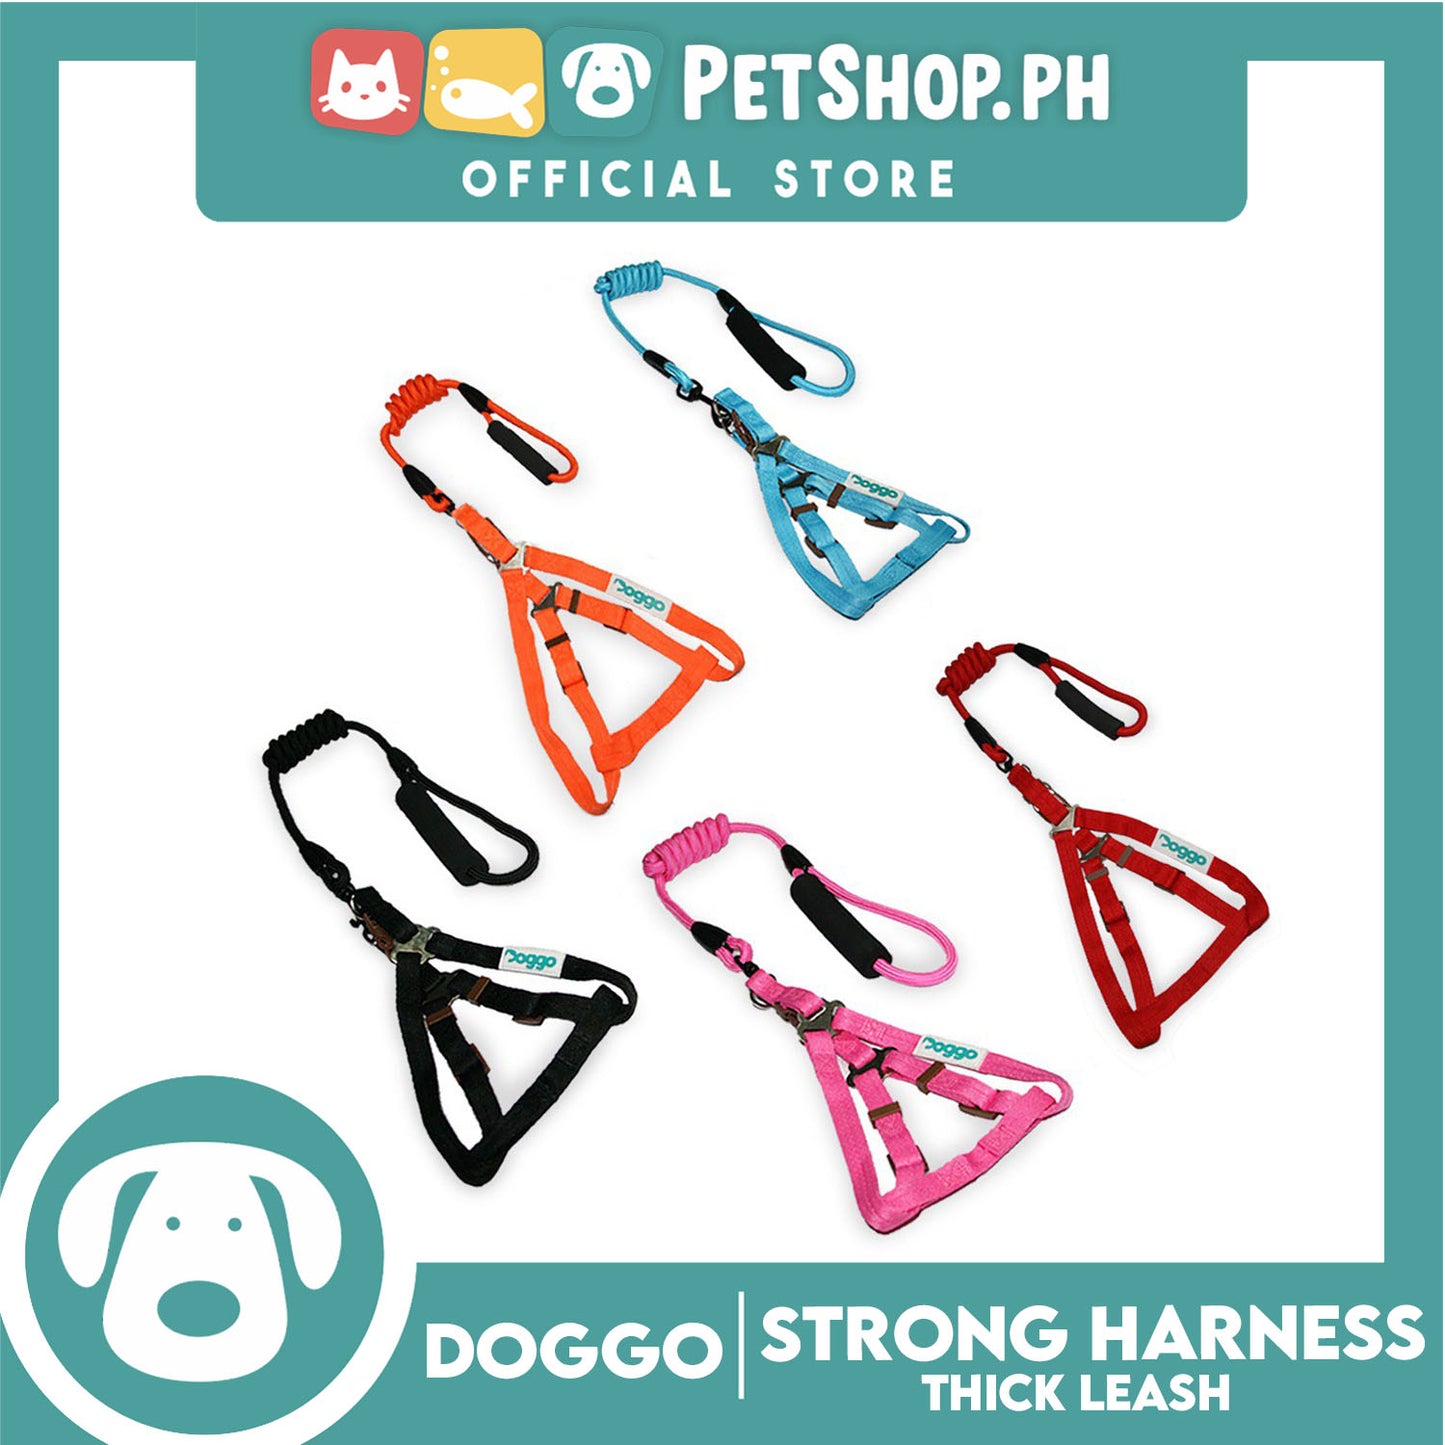 Doggo Strong Harness Thick Leash Soft Handle Steel Connector Medium (Orange) Safe Harness for Your Dog